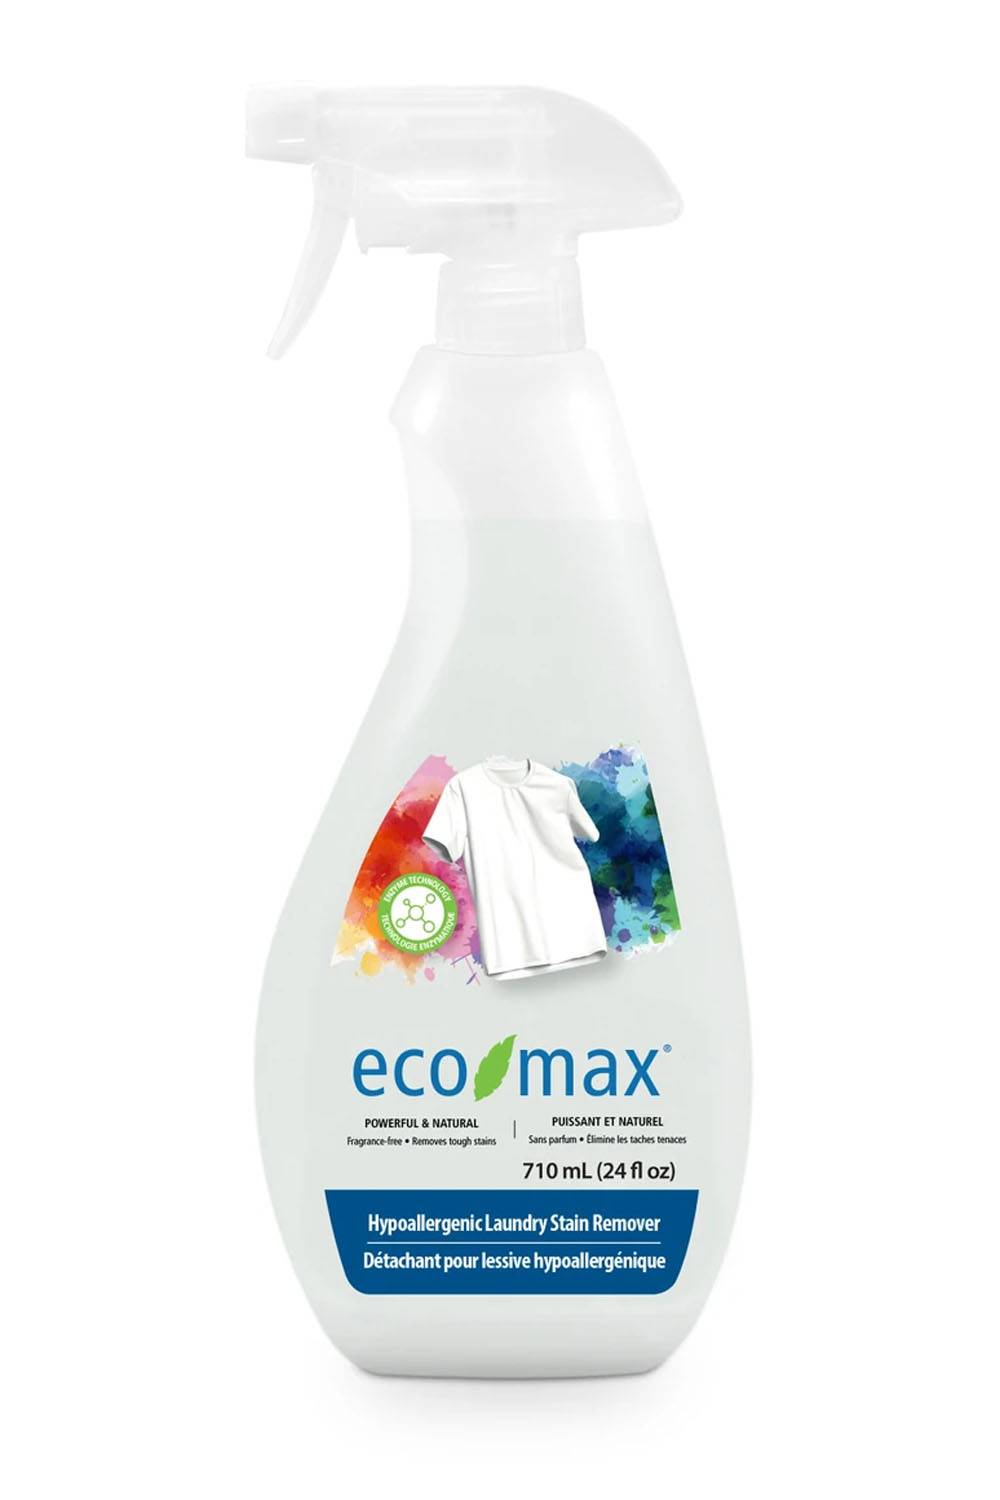 ecomax laundry stain remover